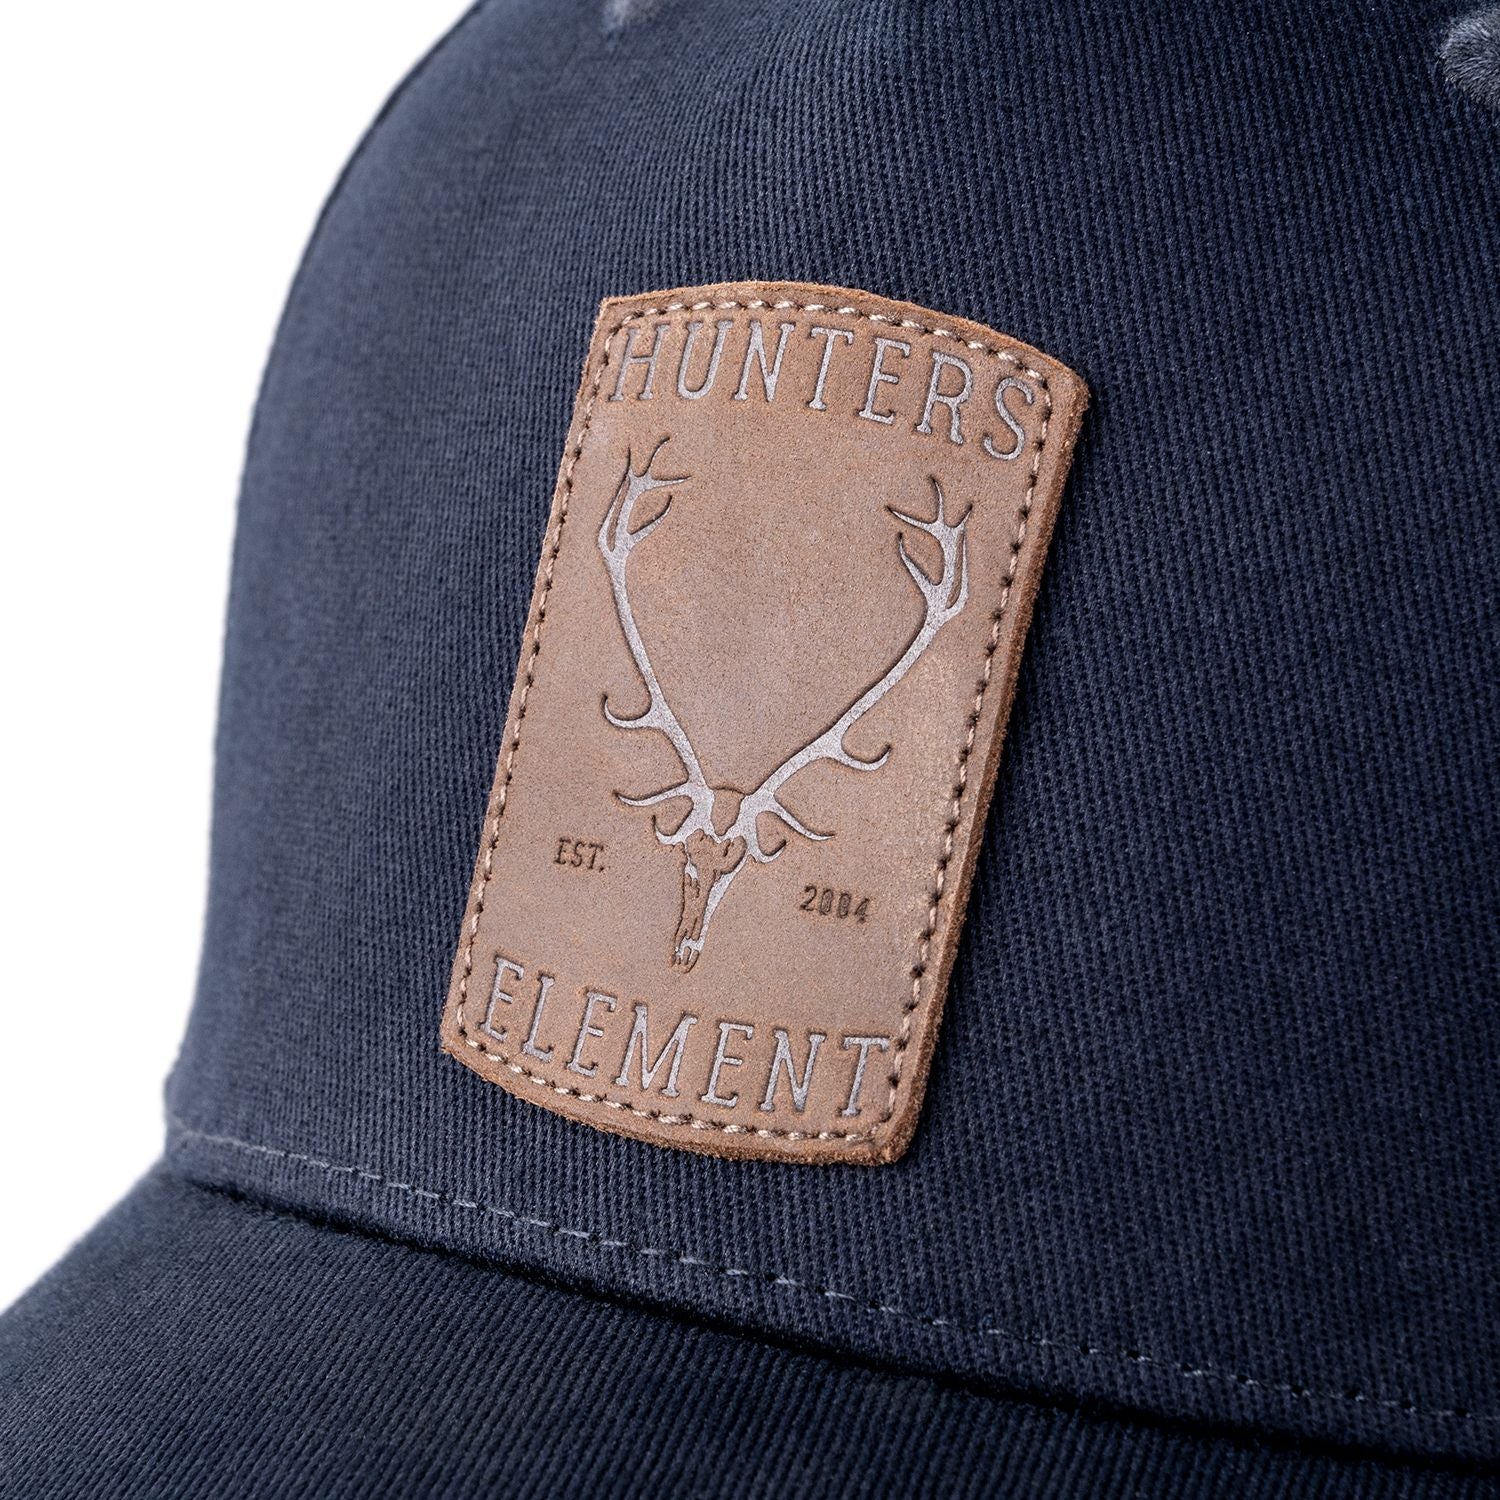 Hunters Element Red Stag Cap - Navy -  - Mansfield Hunting & Fishing - Products to prepare for Corona Virus